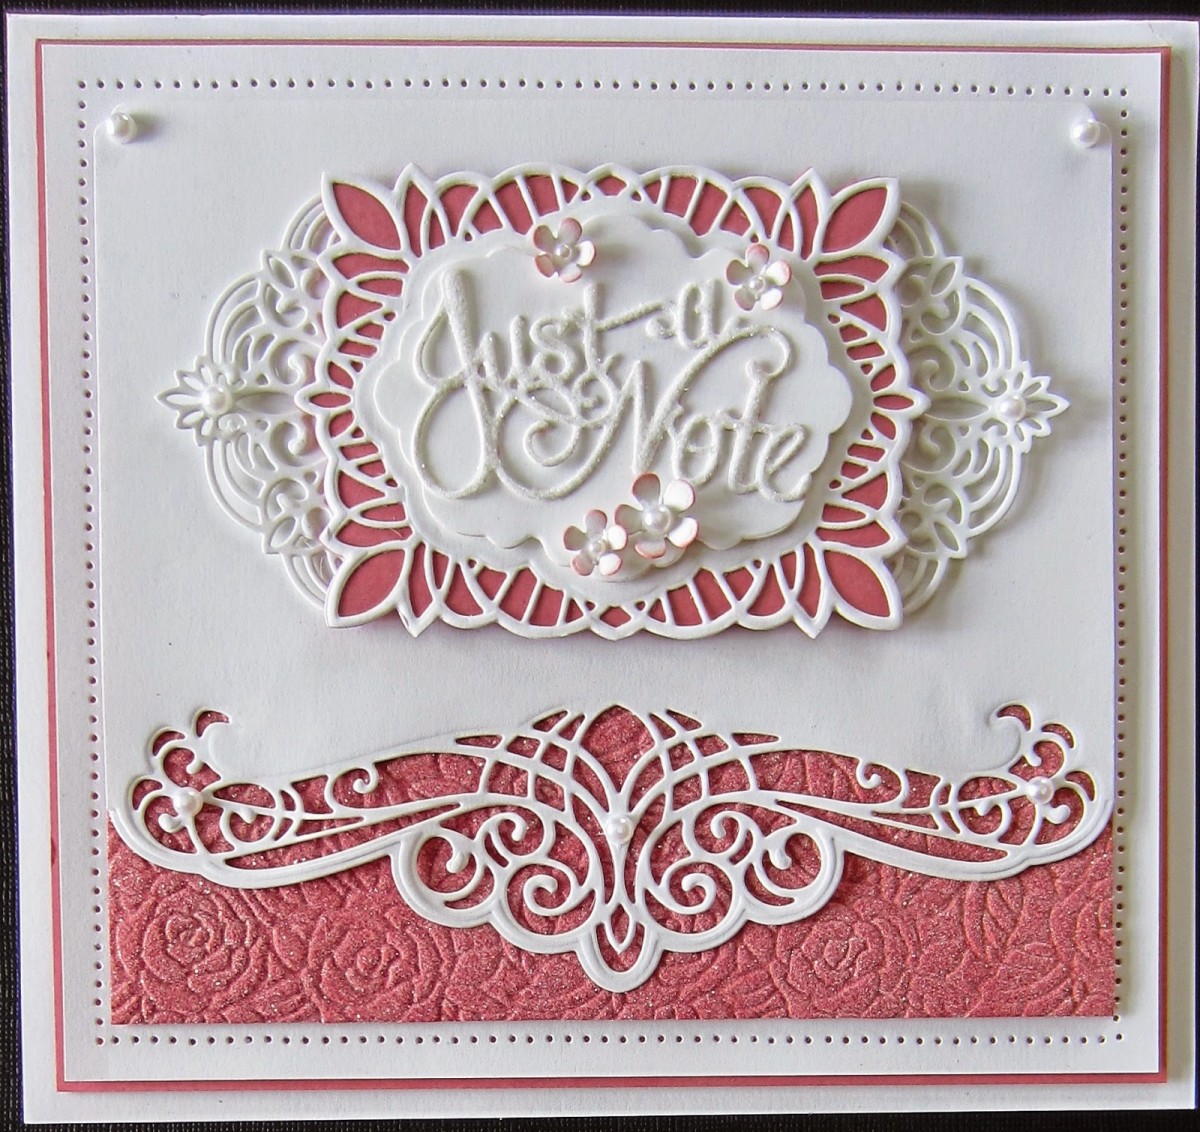 Craft dies make the perfect layered projects for your paper crafting